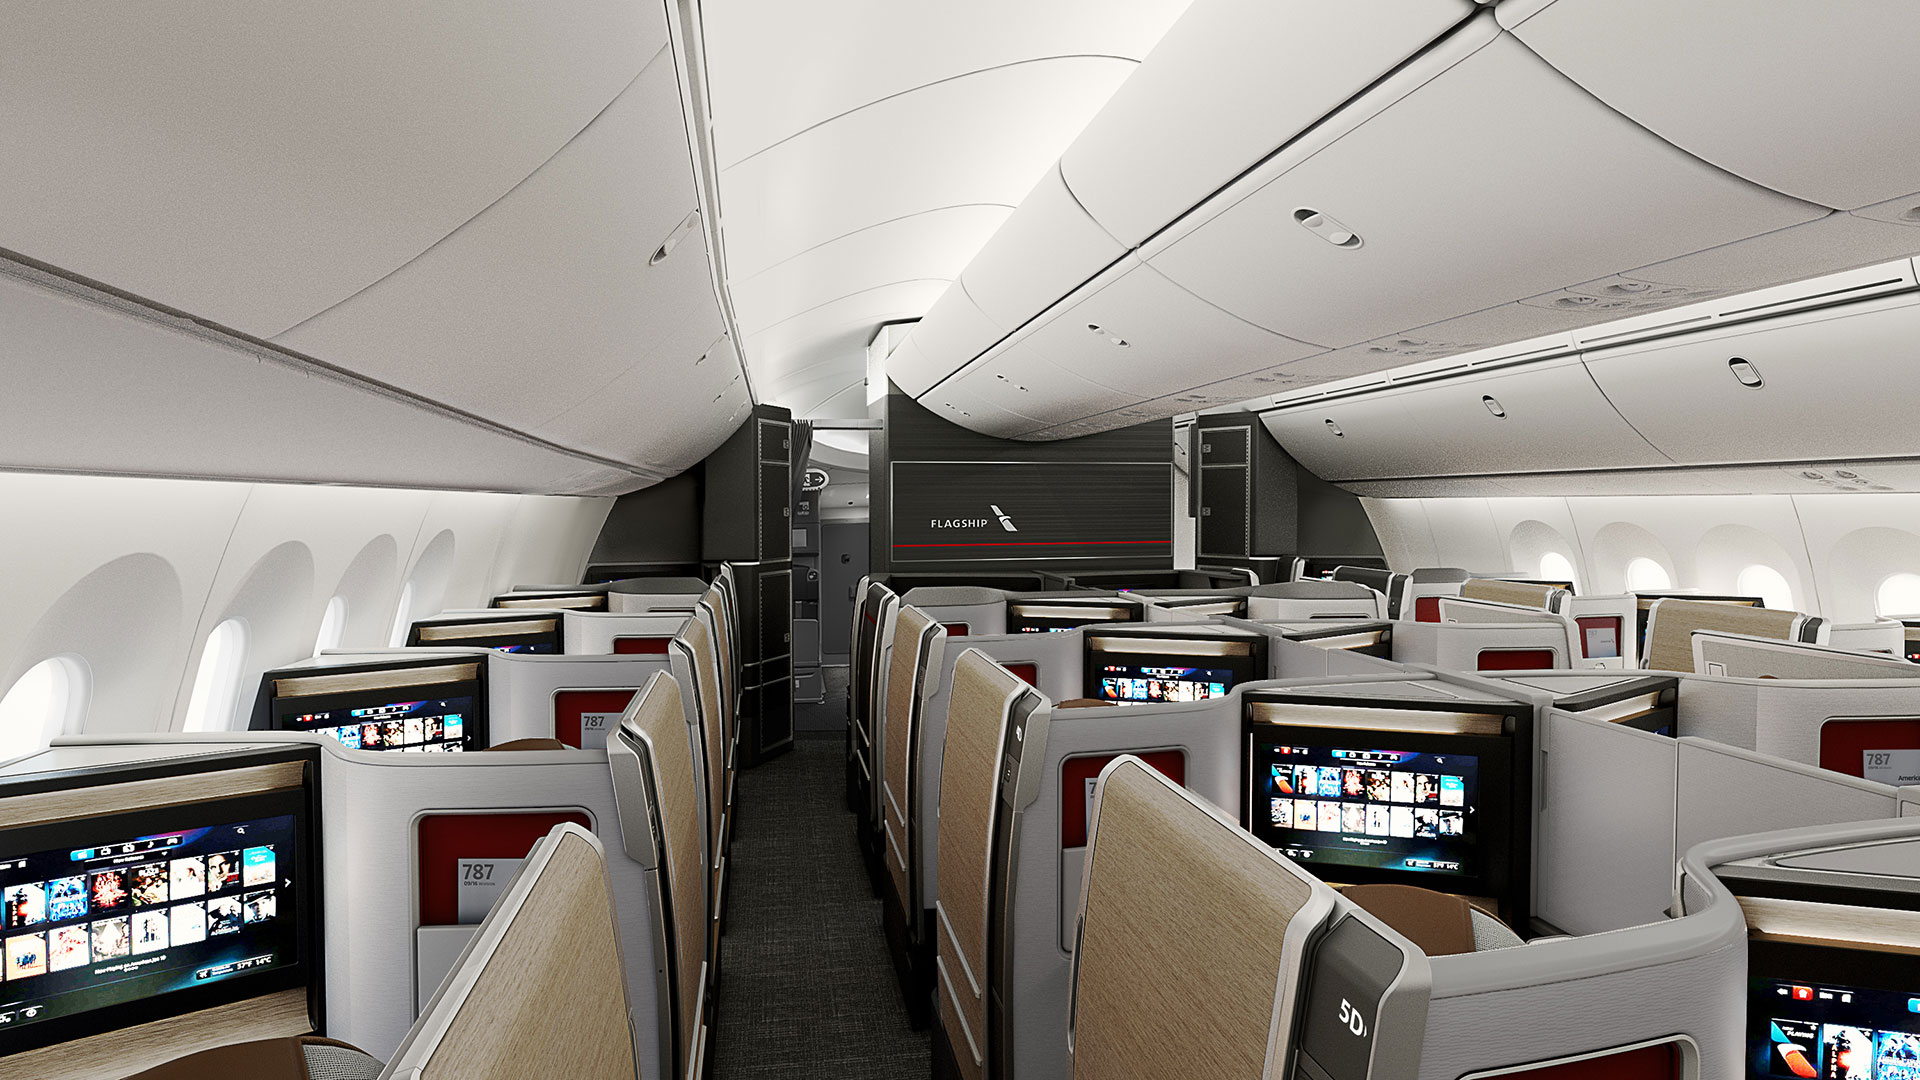 The Boeing 787-9 will have 51 Flagship Suite seats, 21 more than the current Boeing 787-9 that American has in its fleet